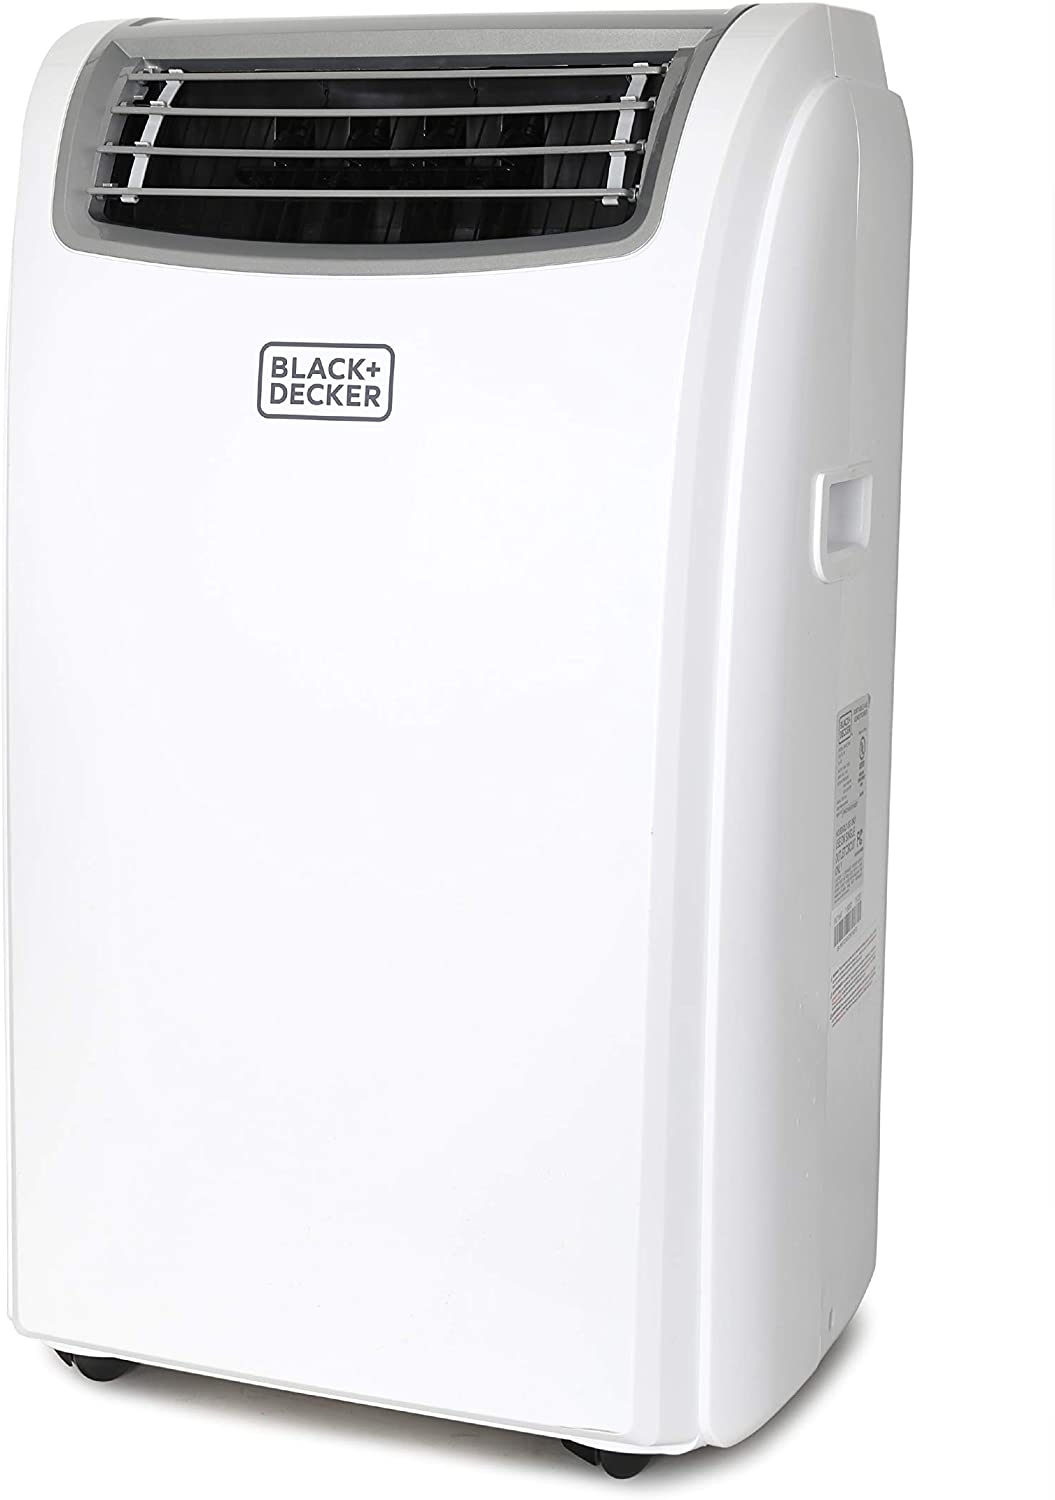 Black and Decker Portable Air Conditioner Review